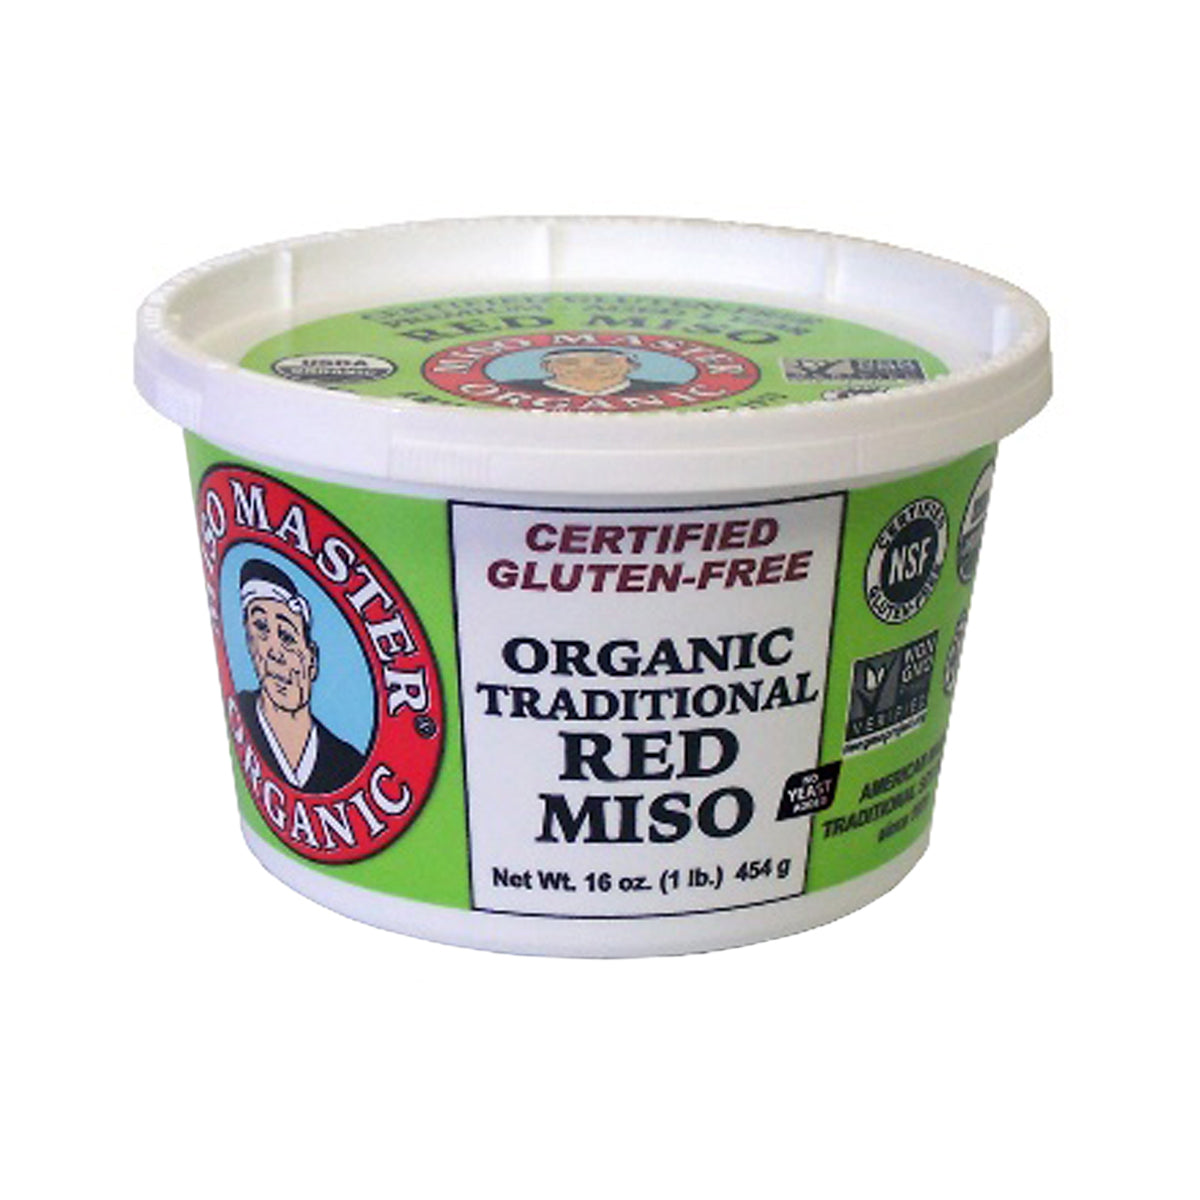 Miso Master Organic Traditional Red Miso